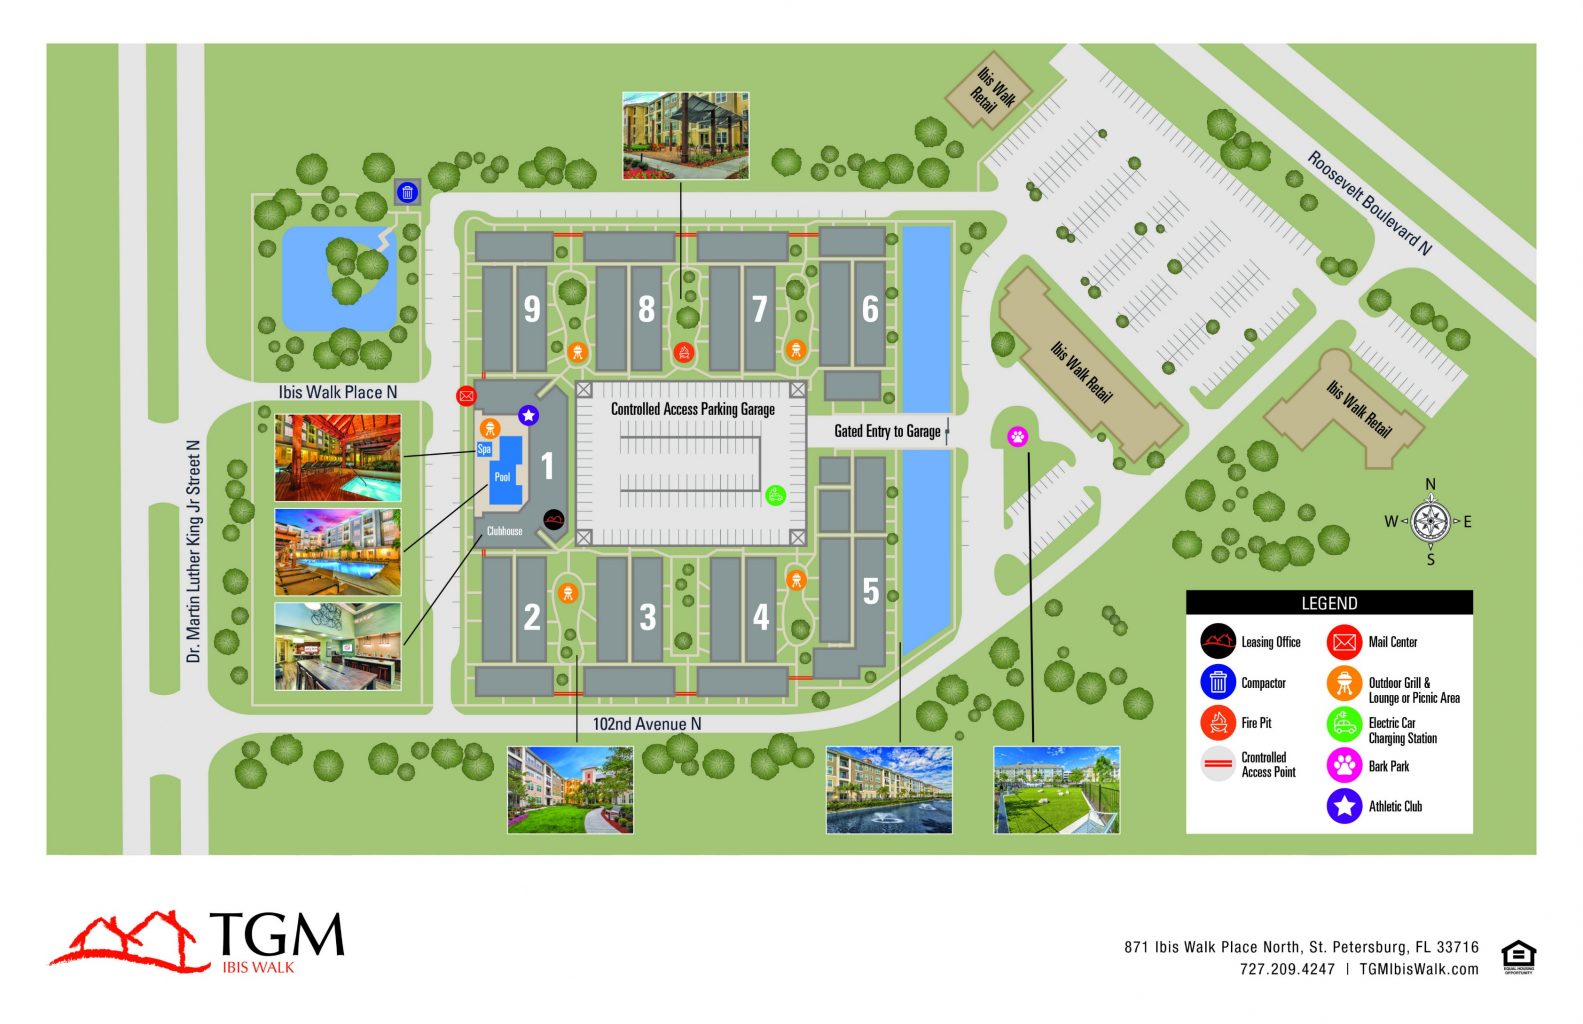 This image shows the map of the TGM Ibis Walk Apartment in St Petersburg, FL.